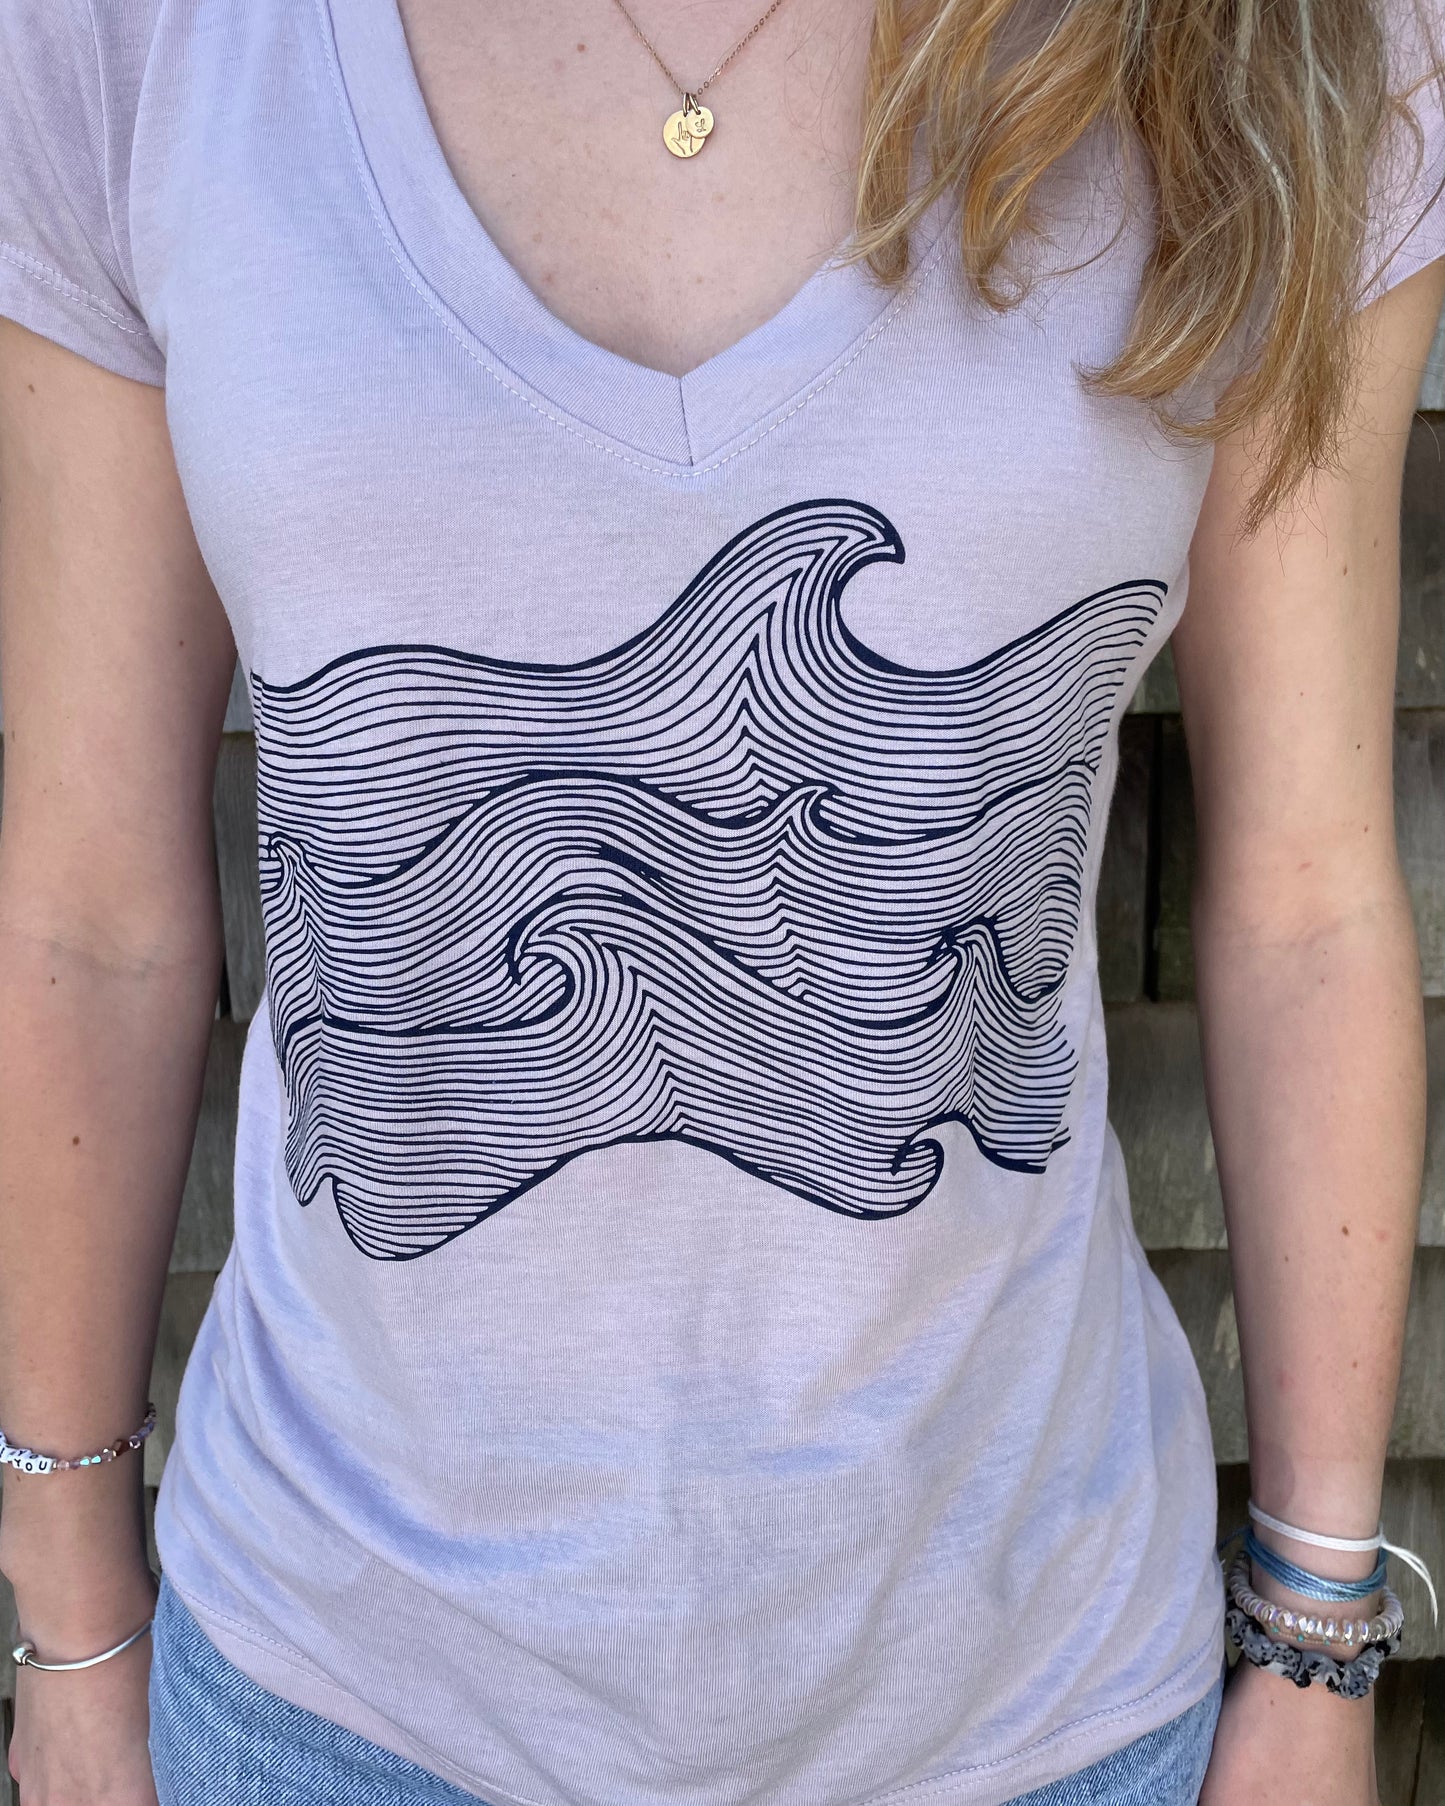 Life Comes in Waves V-Neck Tee